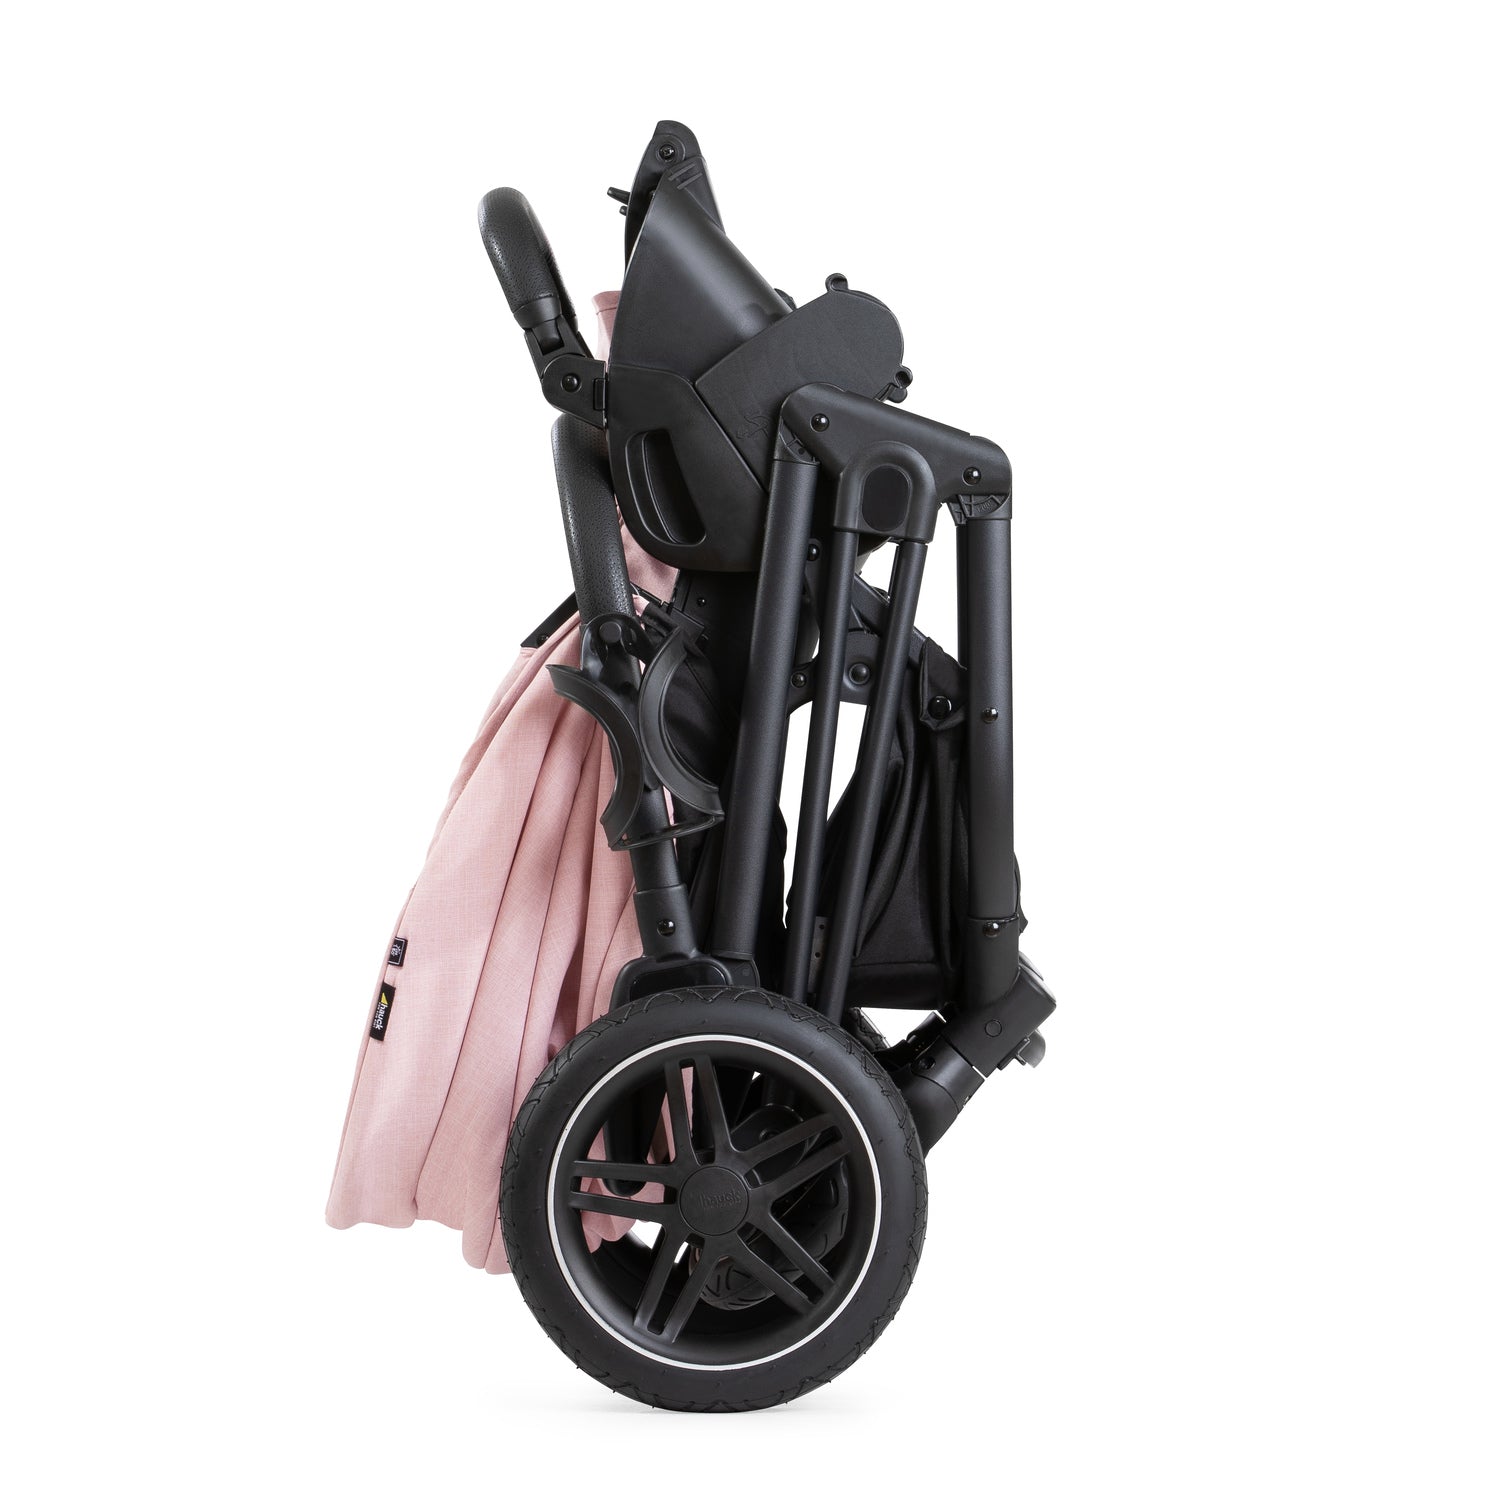 Hauck Vision X Stroller: All-Terrain, Travel System, Reversible (Free Infant Car Seat & Isofix Base)